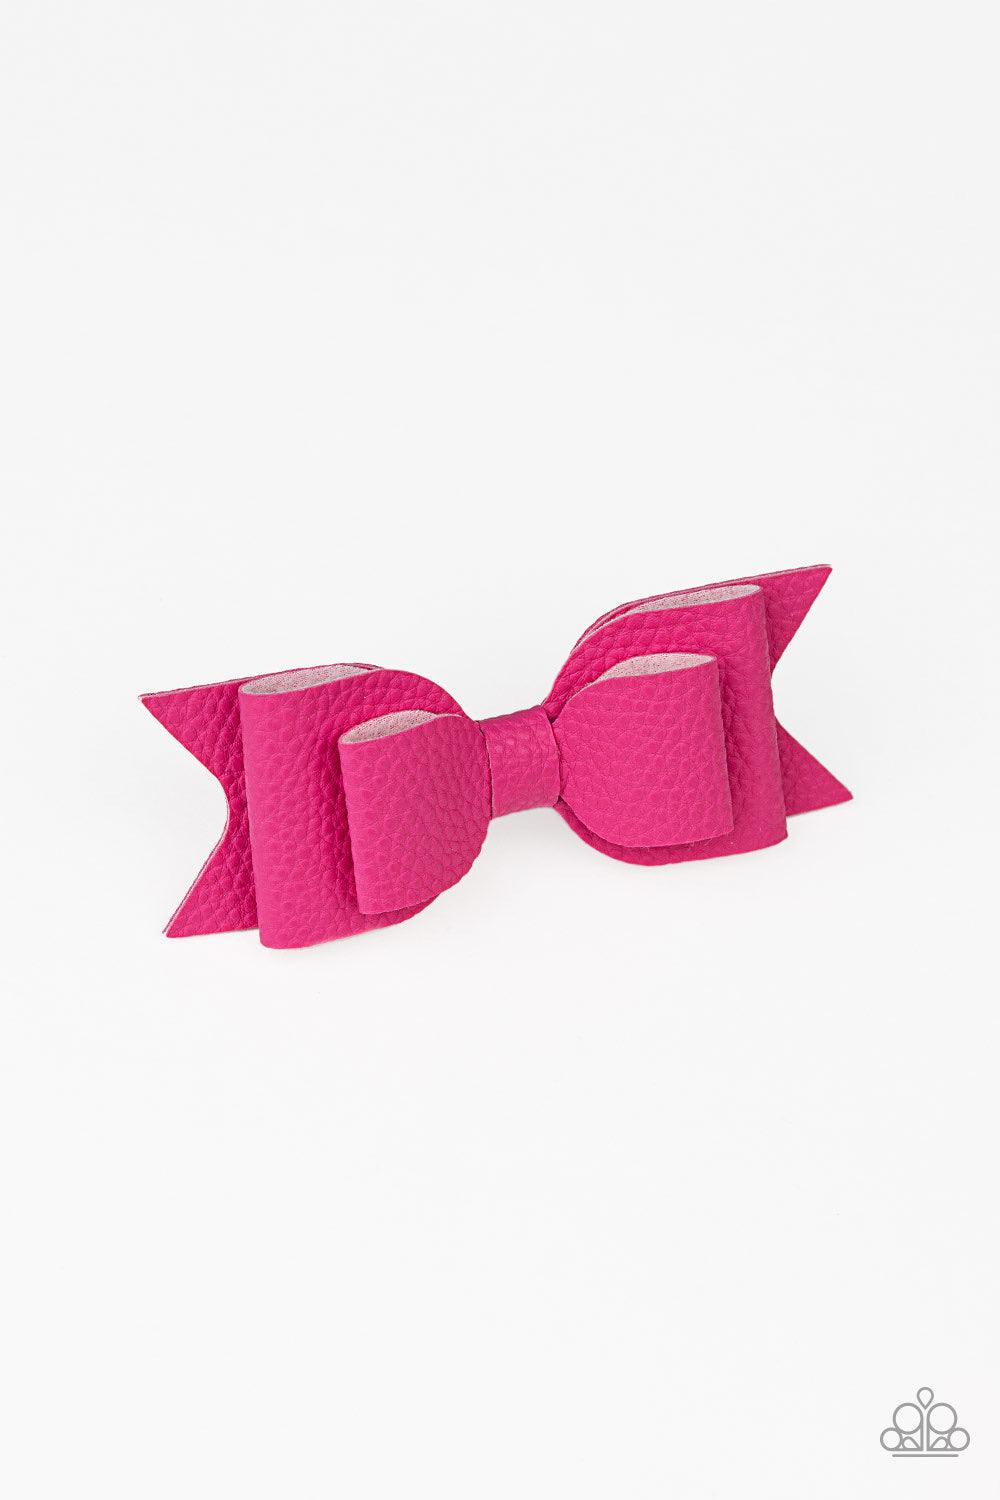 Paparazzi Accessories Bow Wow Wow - Pink Painted in a flamboyant pink finish, textured leather ties into a flirtatious hair bow. Features a standard hair clip on the back. Hair Accessories